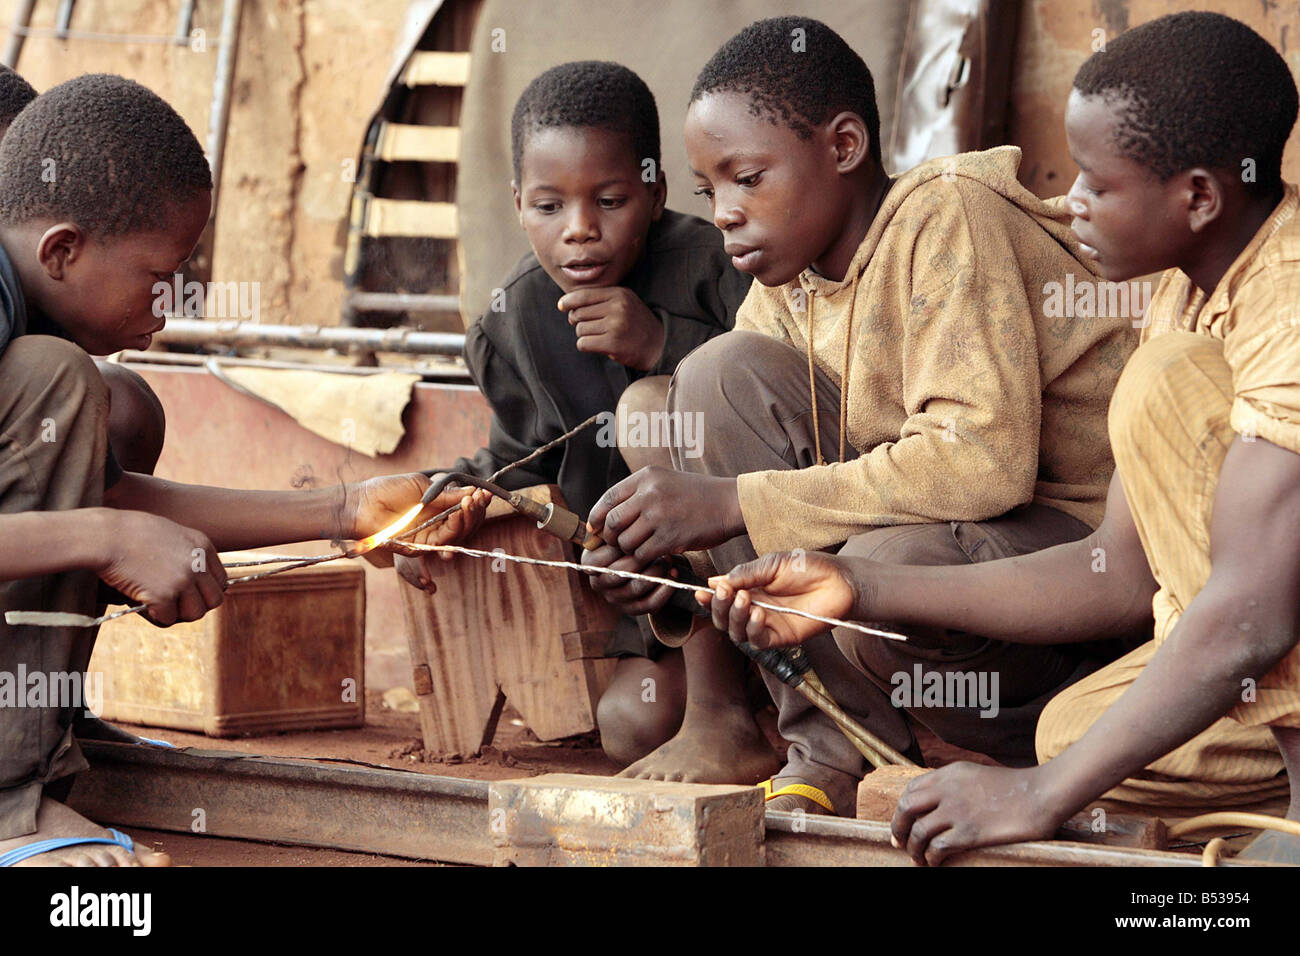 Child Slaves in Benin West Africa February 2007 Child labour working in Benin West Africa young kids working in the forge in Dan Tokpa market Cotouno HIDDEN away in a corner of this foul and sprawling market boys as young as five toil in the festering heat Before you see the faces of these wretched children you hear the sound of their enslavement the clamour of heavy lead hammers on sheets of metal Barefoot and ragged these youngsters were sold for just 10 by their parents to child traffickers who sell them on to work without pay and without hope in demeaning sweatshops Mamoutche a frightened Stock Photo